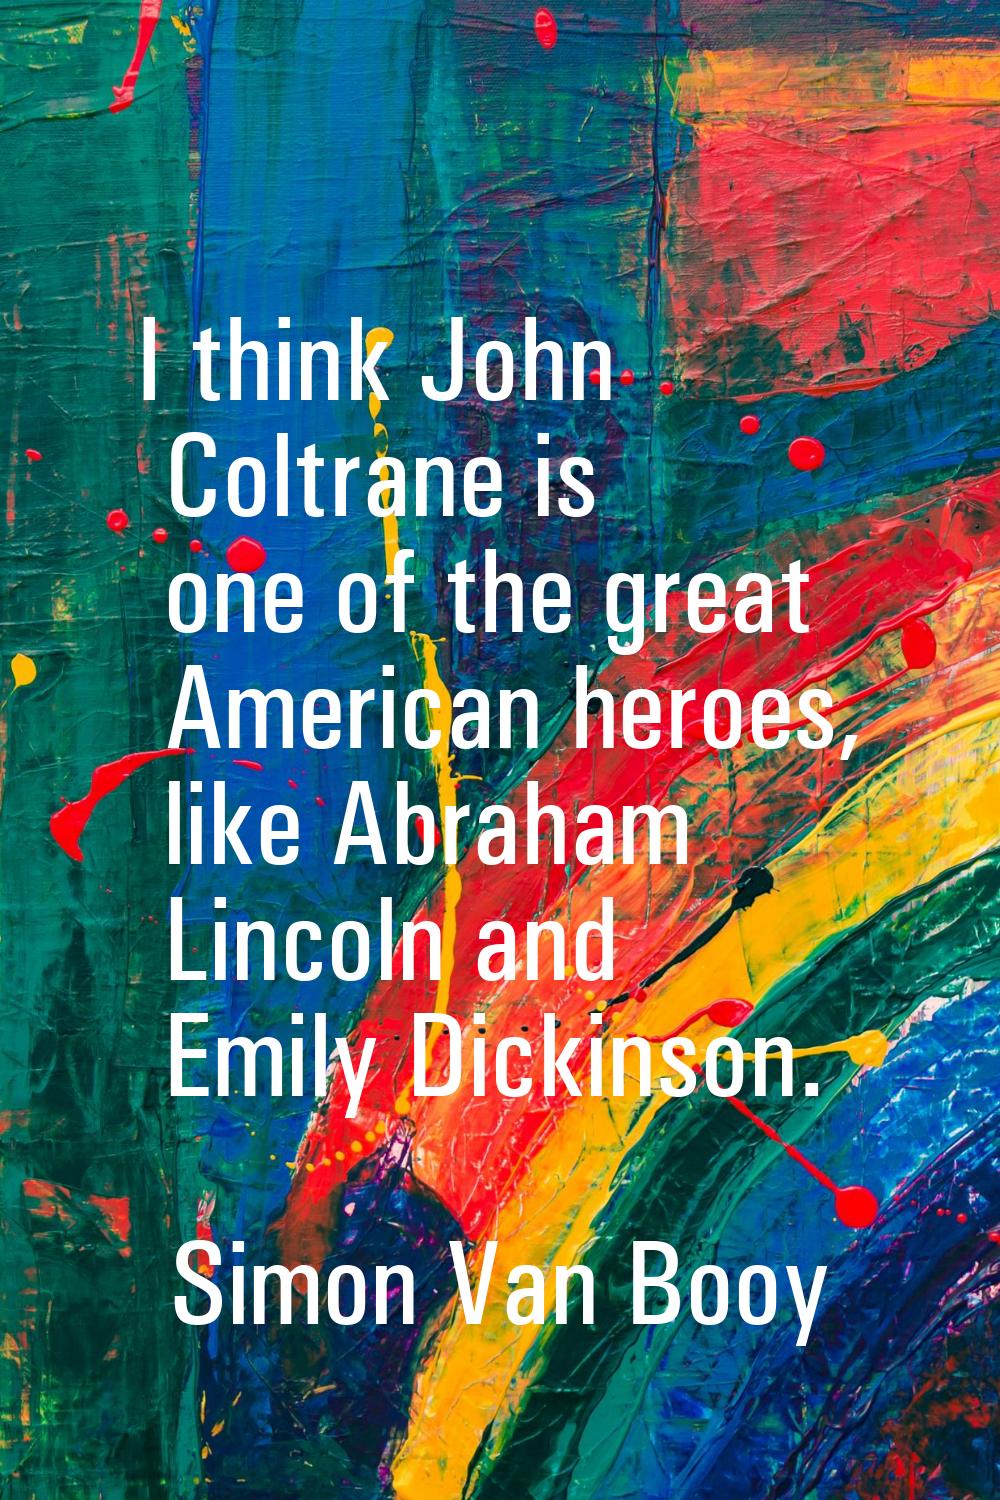 I think John Coltrane is one of the great American heroes, like Abraham Lincoln and Emily Dickinson